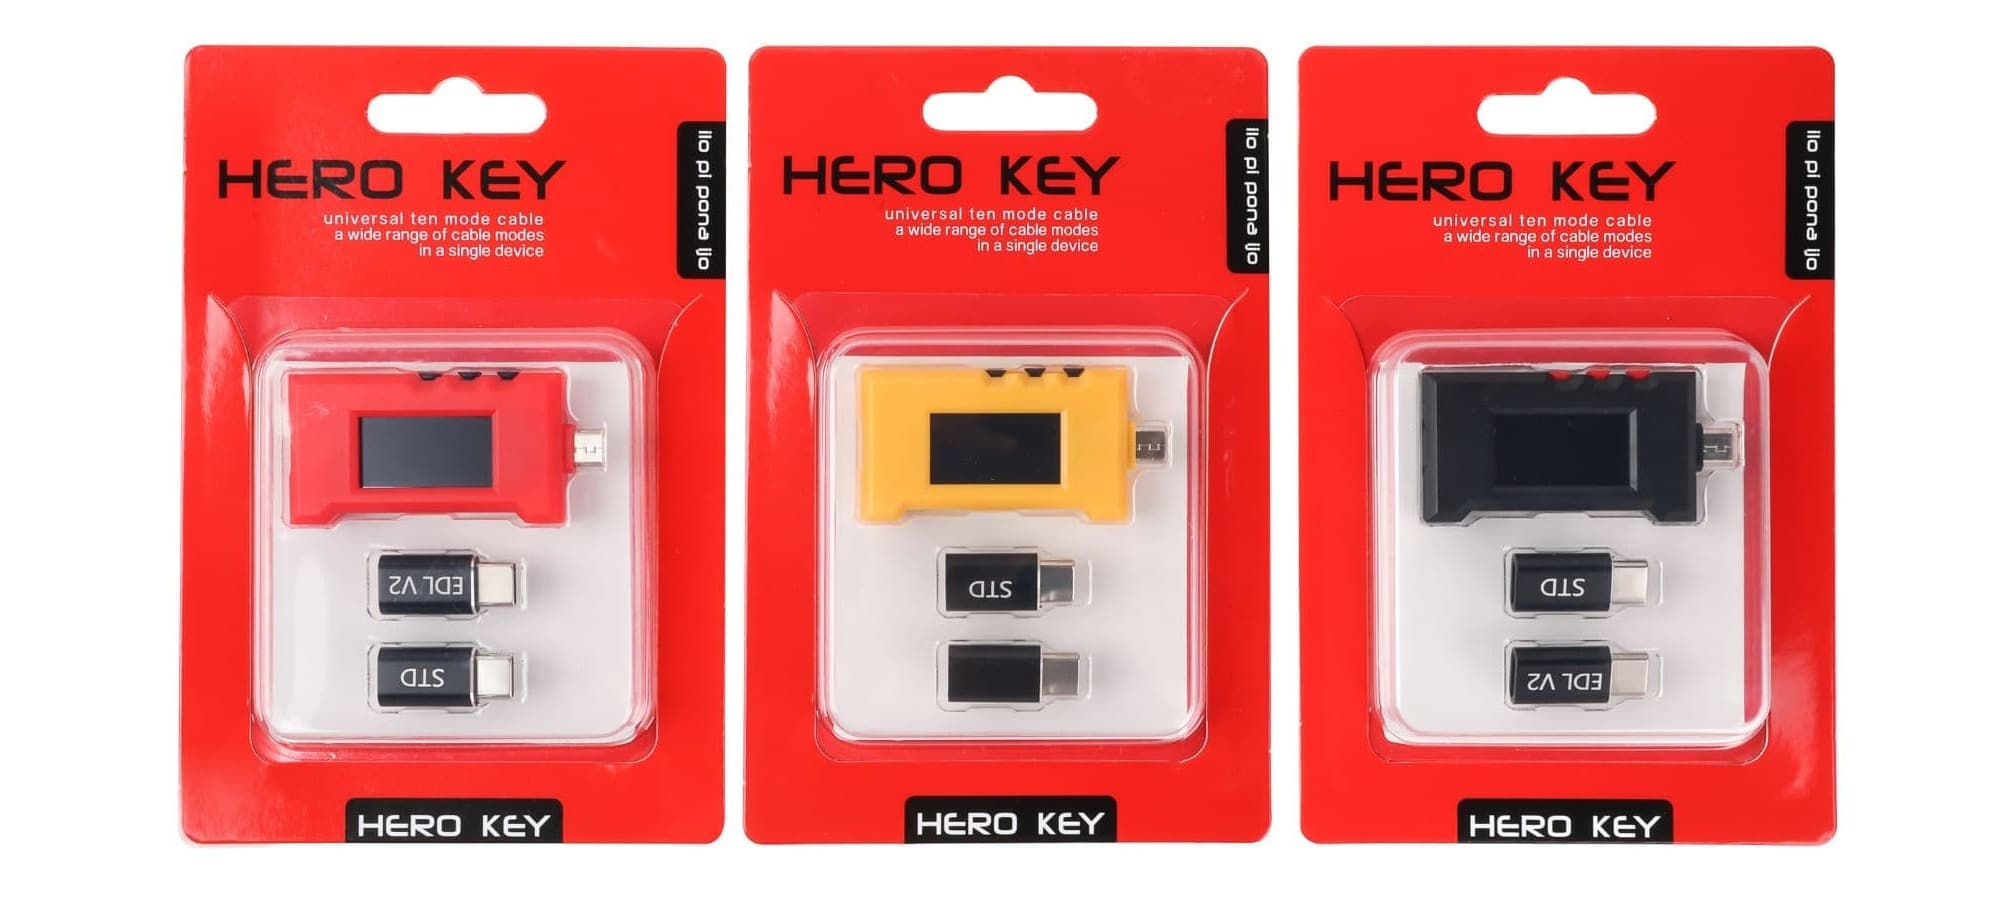 Hero-Key is available in various colors